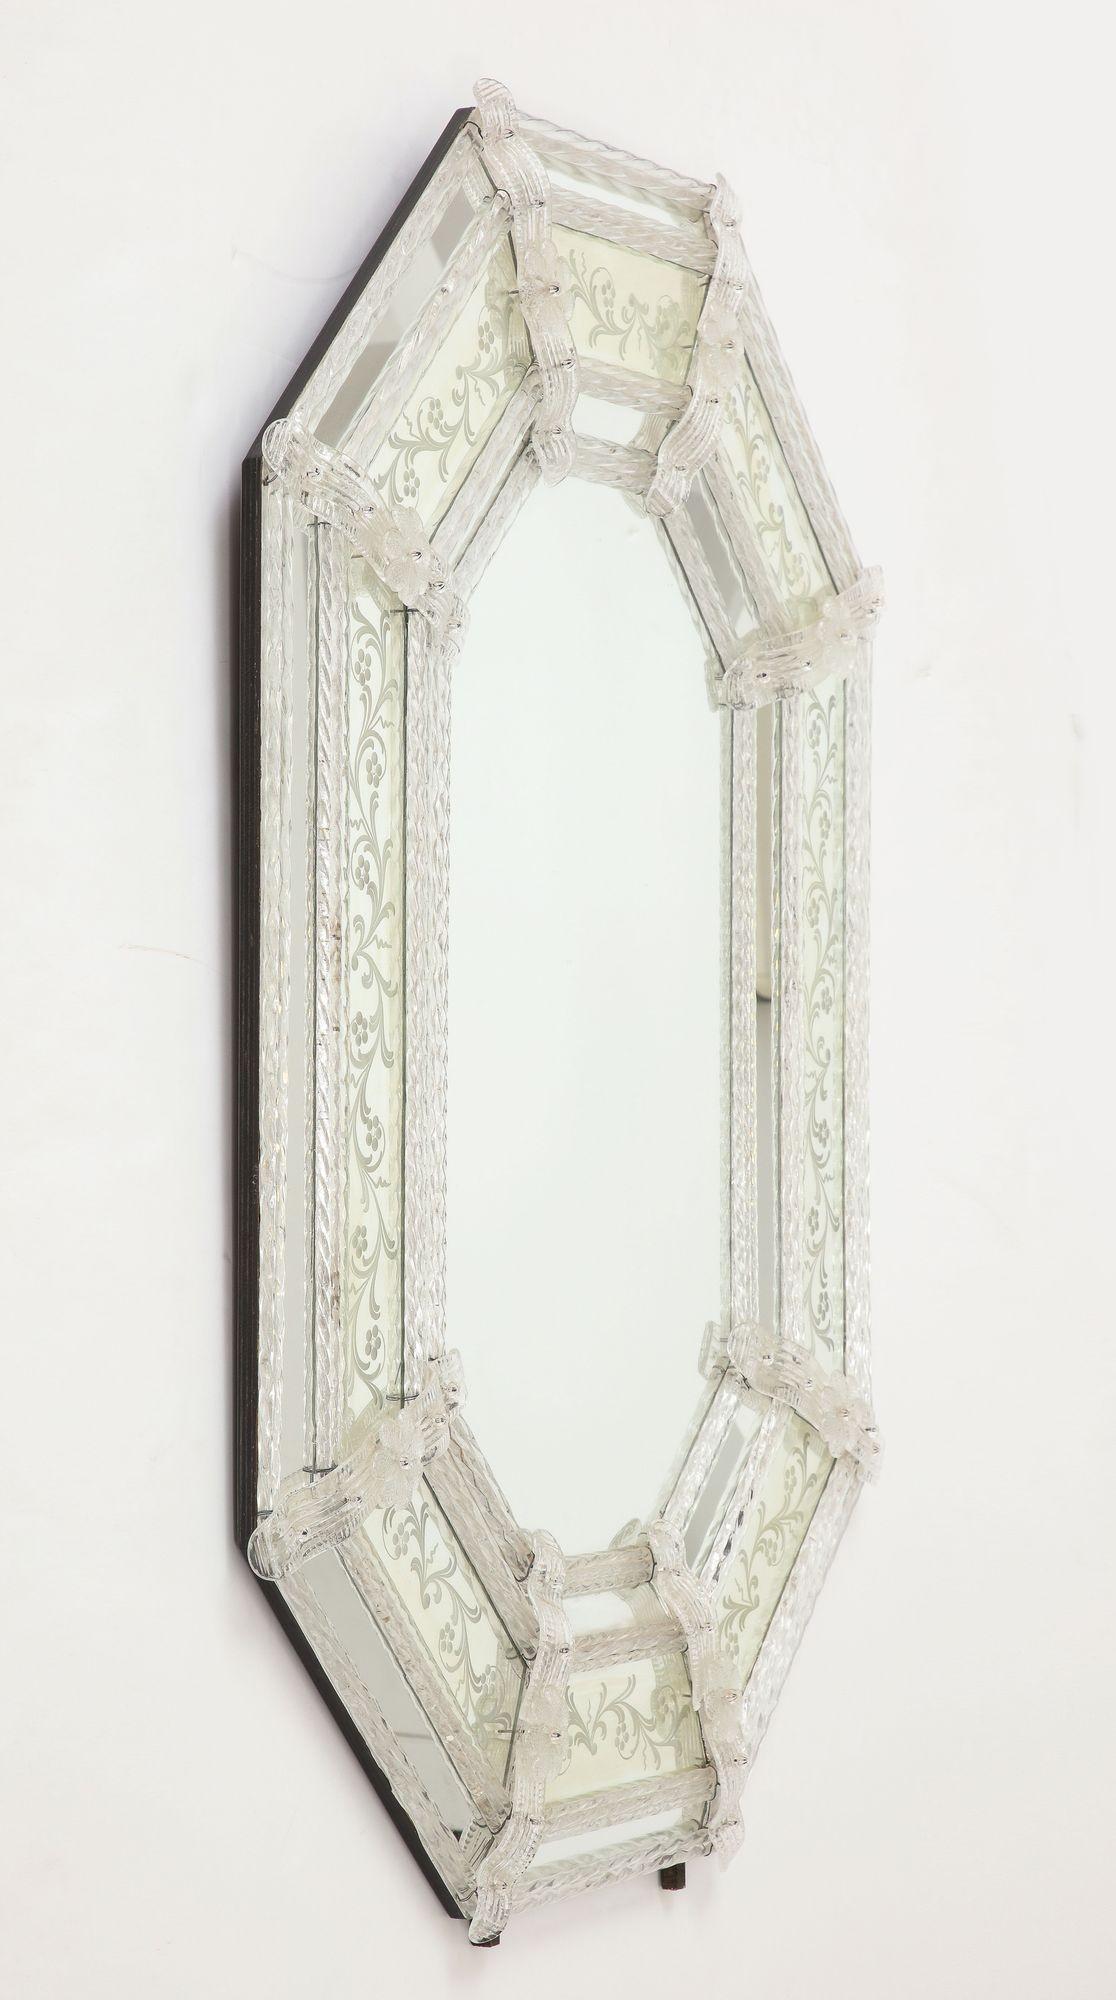 Hexagonal Stepped Etched Venetian Mirror.